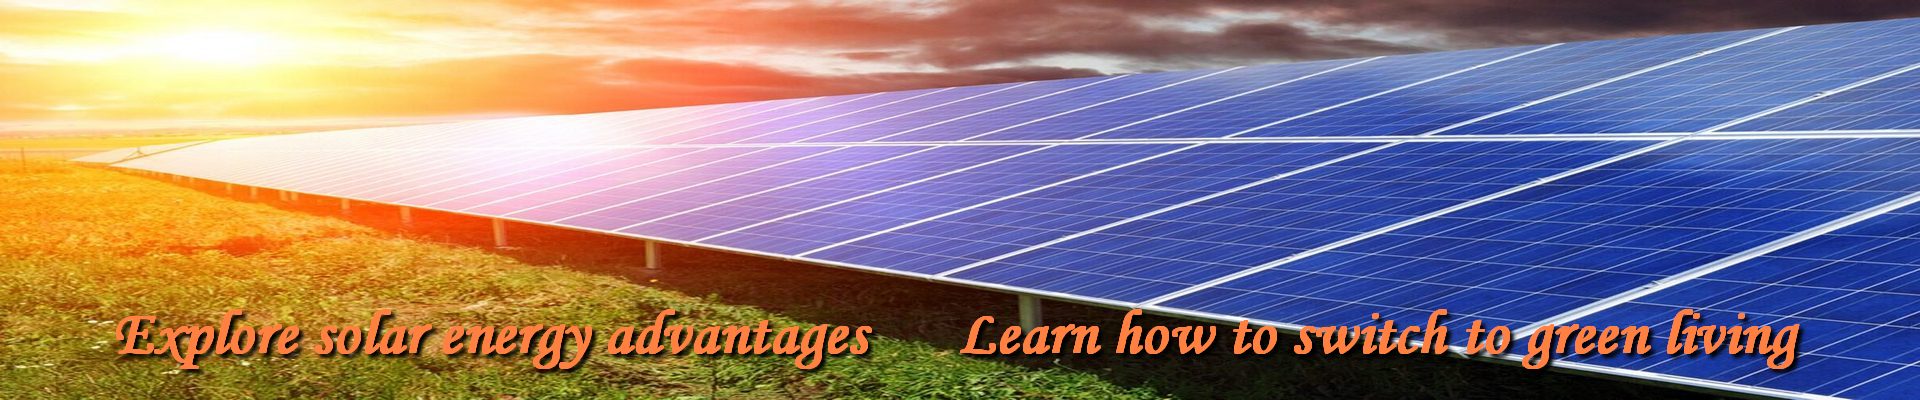 Explore solar energy advantages | Learn how to switch to green living